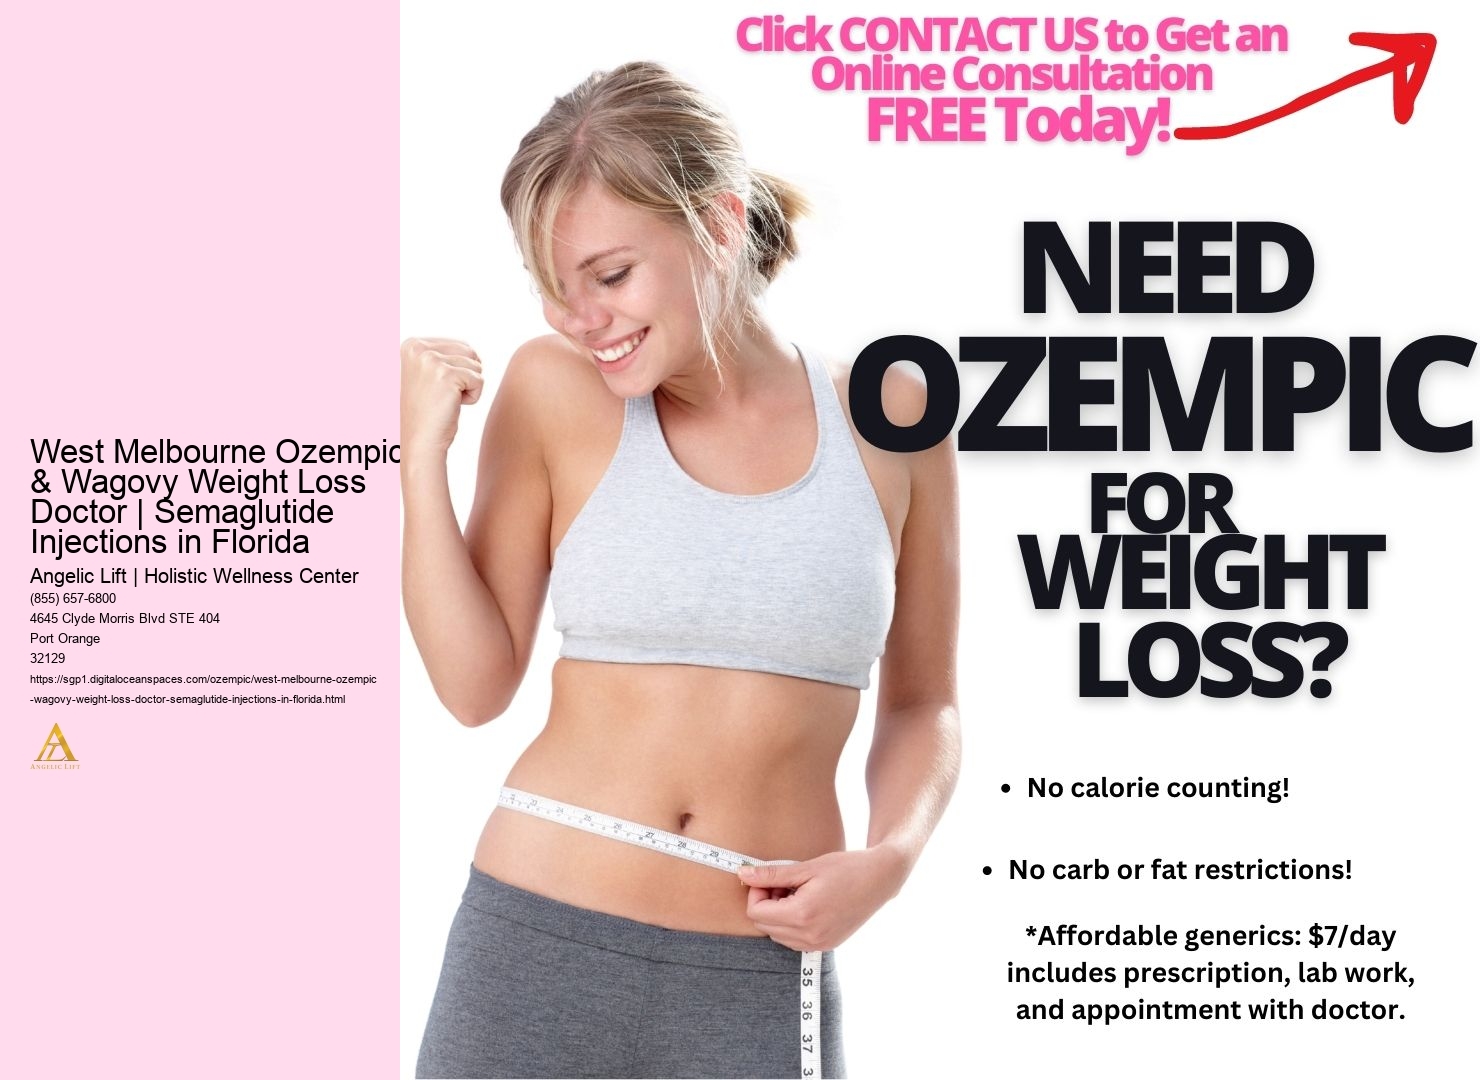 West Melbourne Ozempic & Wagovy Weight Loss Doctor | Semaglutide Injections in Florida